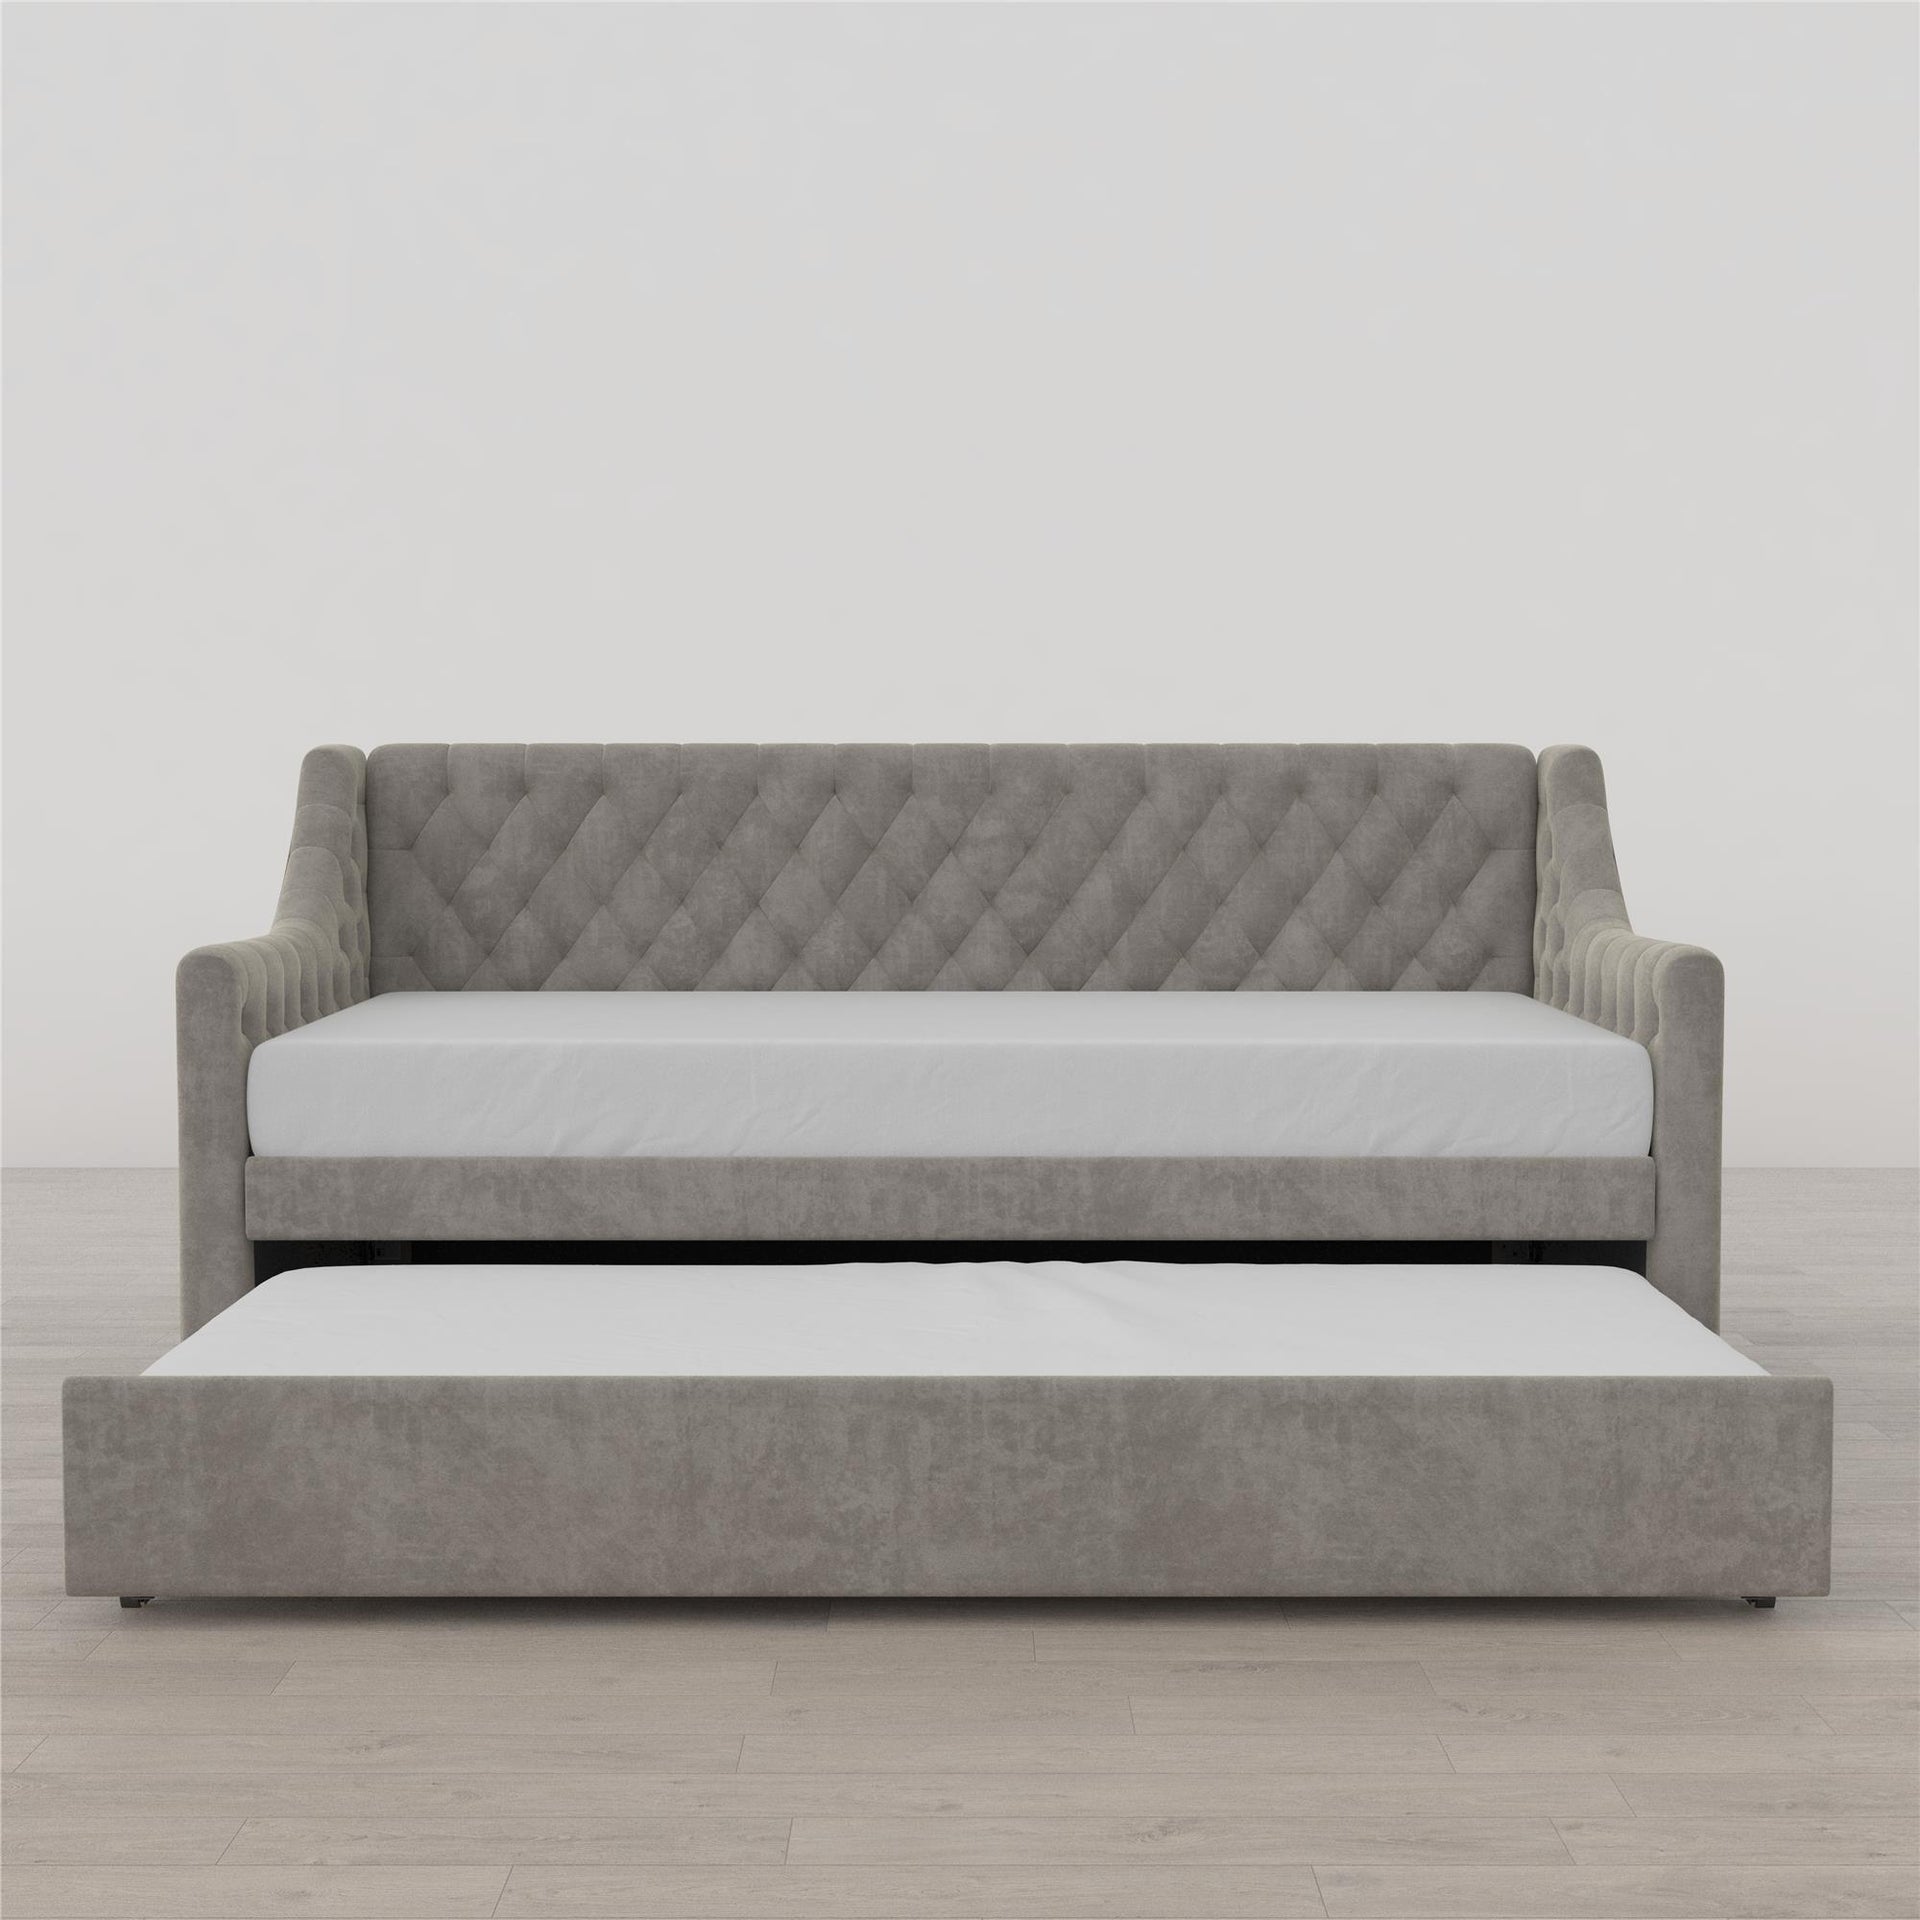 Little Seeds Monarch Hill Ambrosia Upholstered Daybed and Trundle - Light Gray - Twin